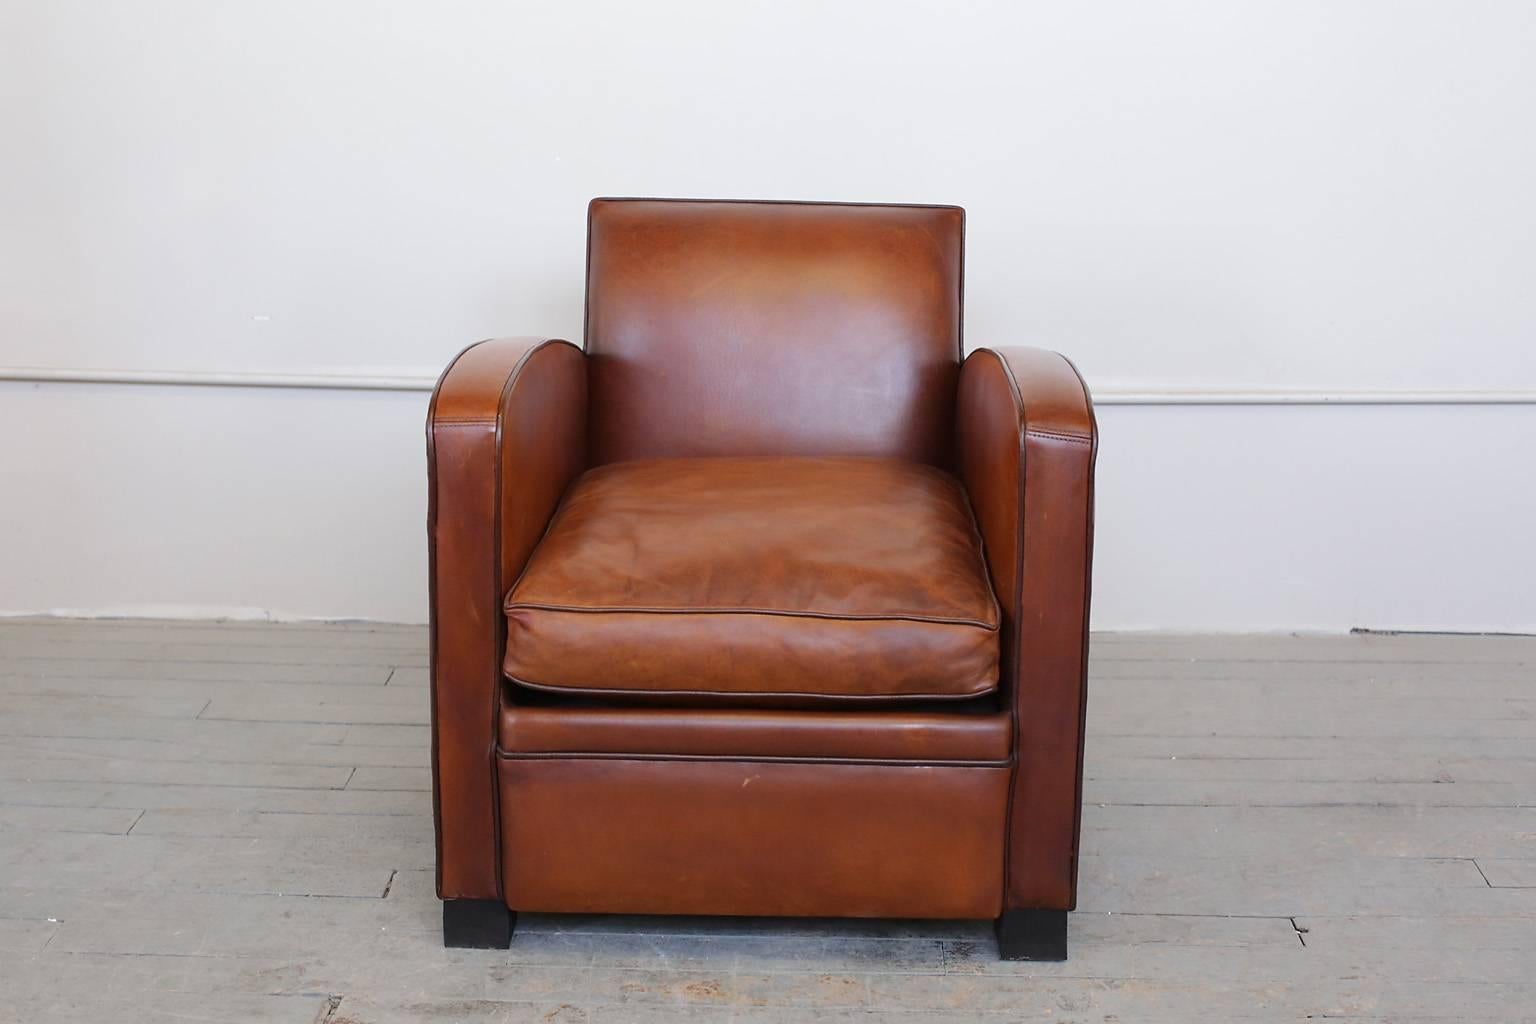 French Art Deco Parisian club chairs with their original leather are in excellent condition.